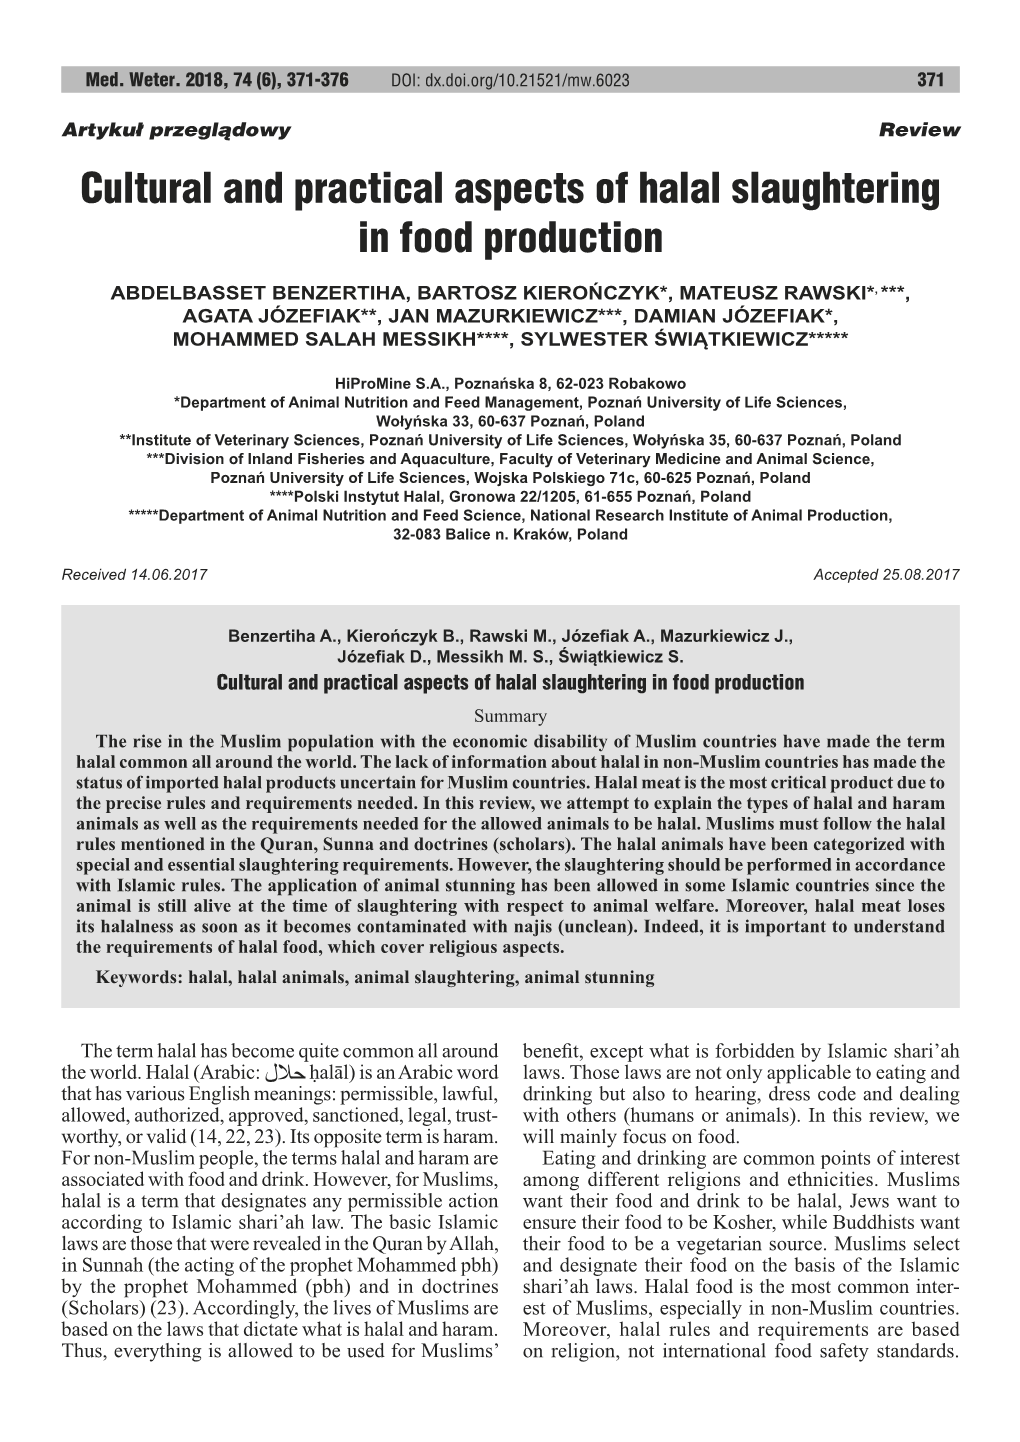 Cultural and Practical Aspects of Halal Slaughtering in Food Production